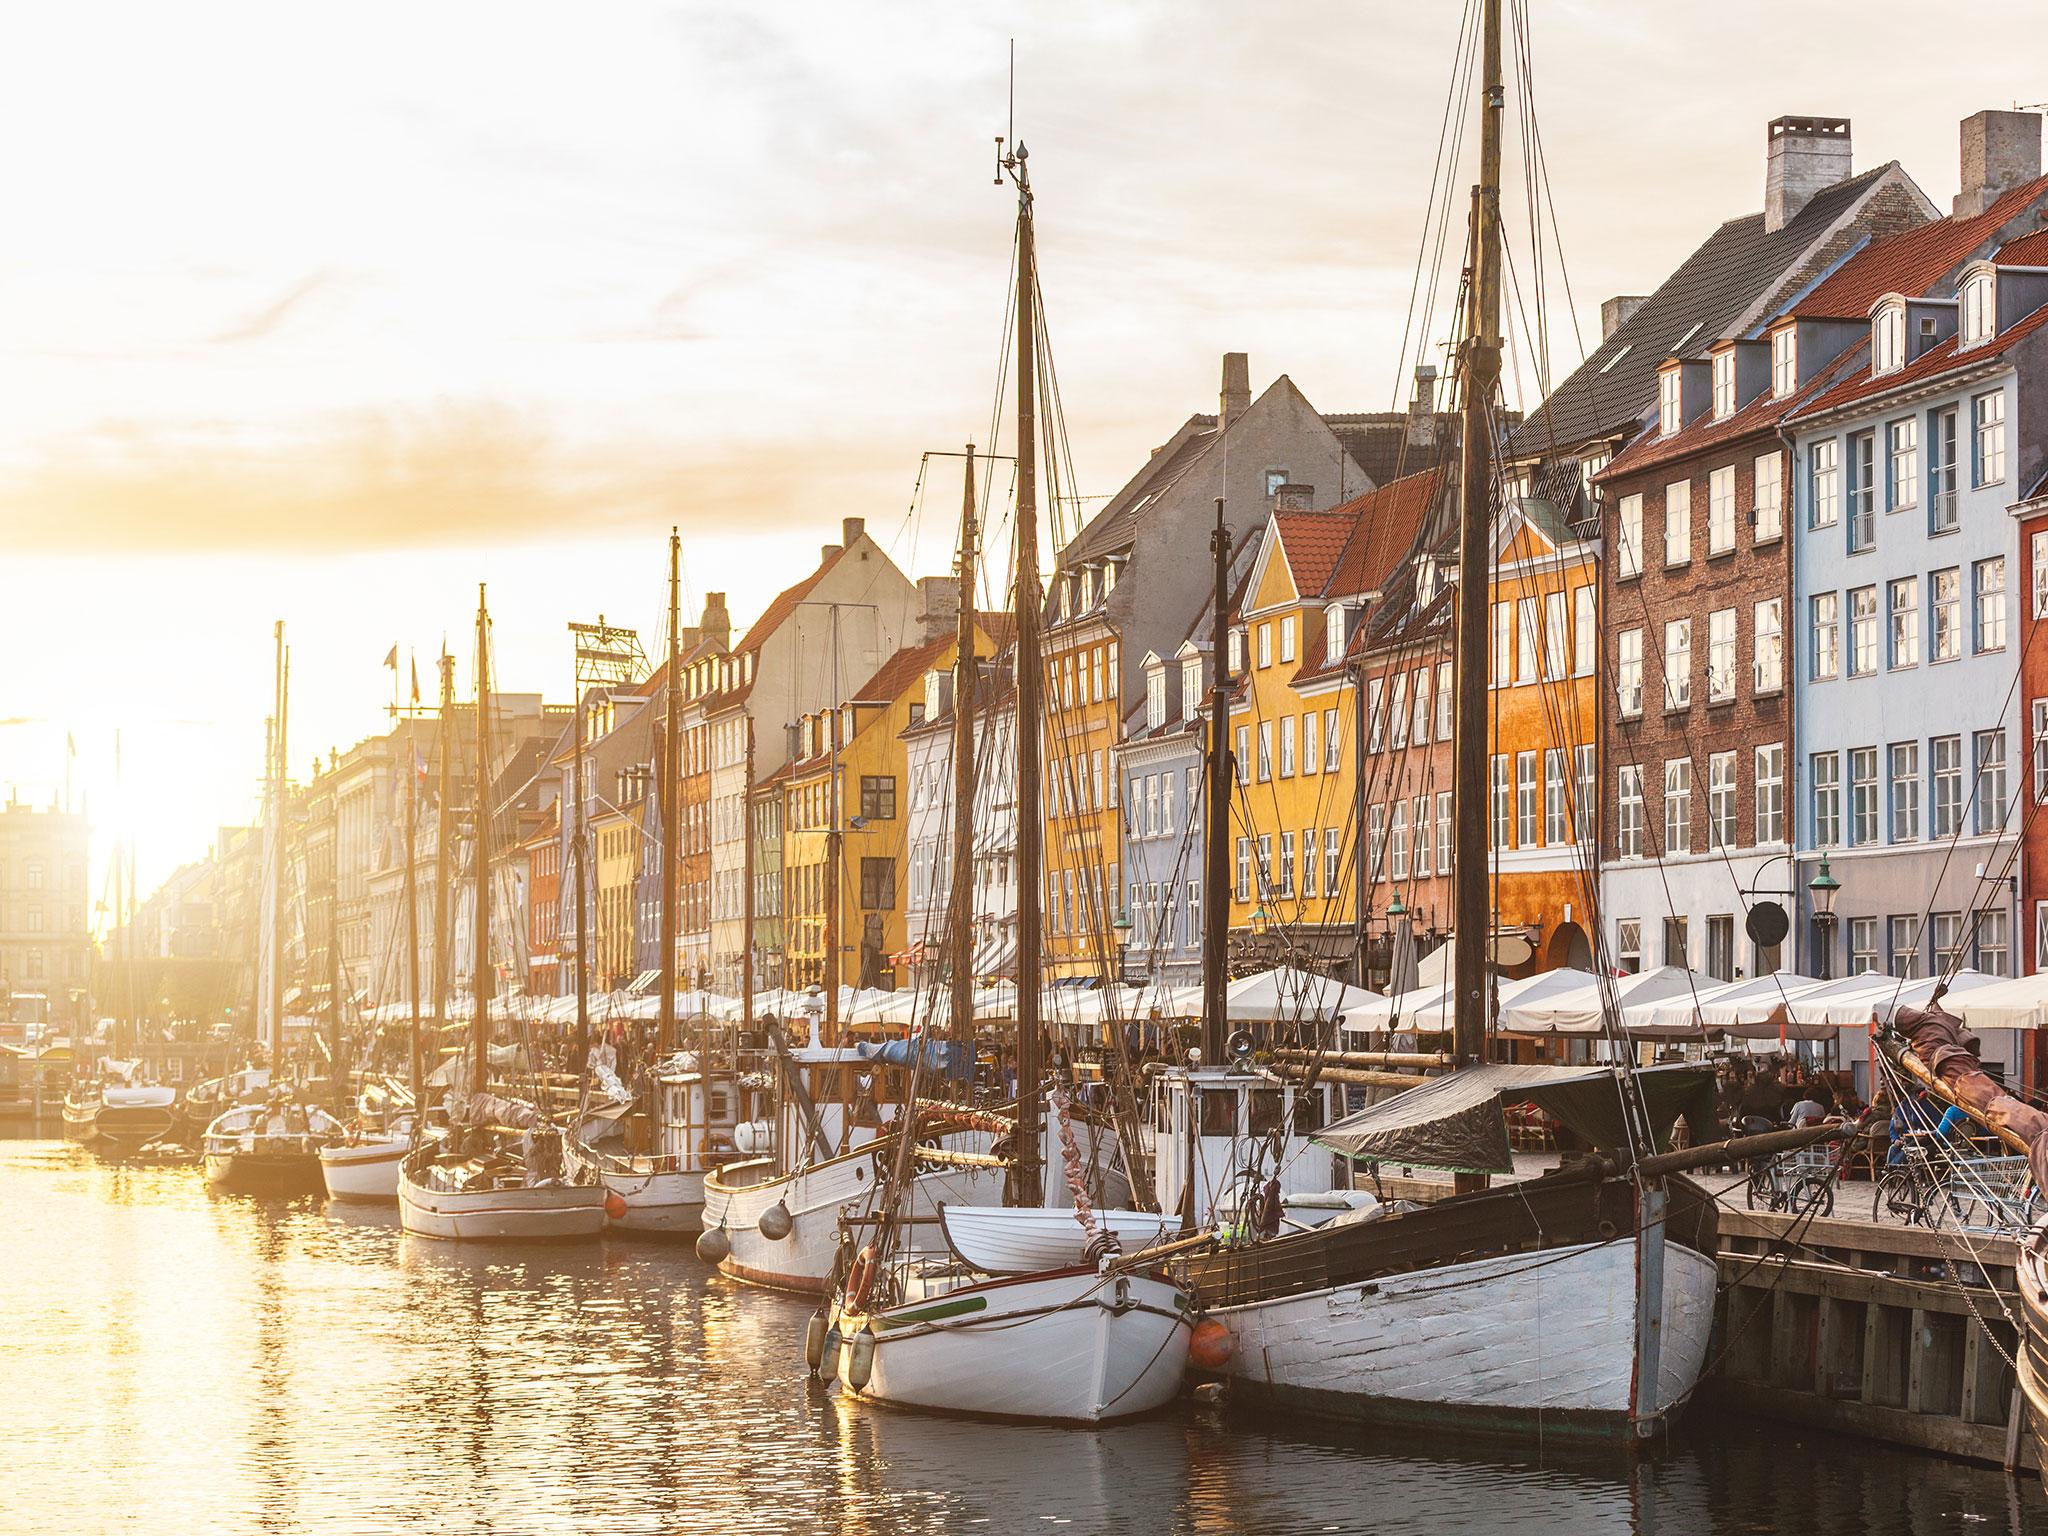 Colourful houses in Copenhagen's old town at sunset